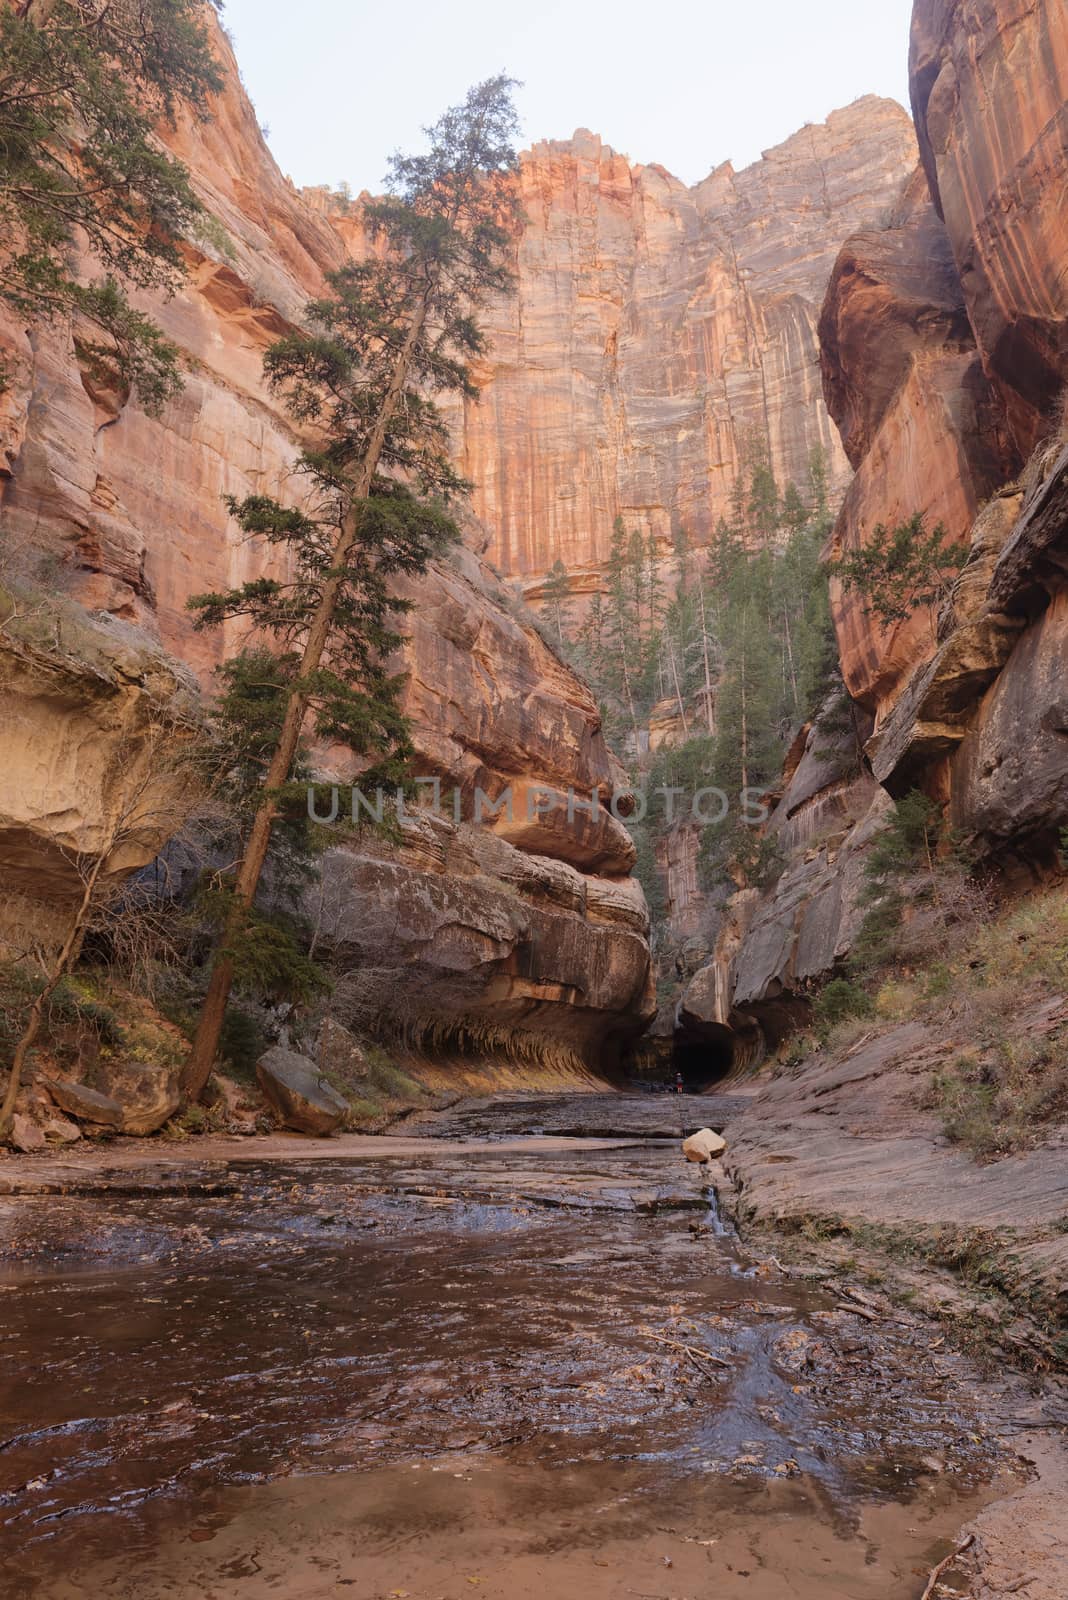 Entrance to The Subway, Zion National Park by emiddelkoop